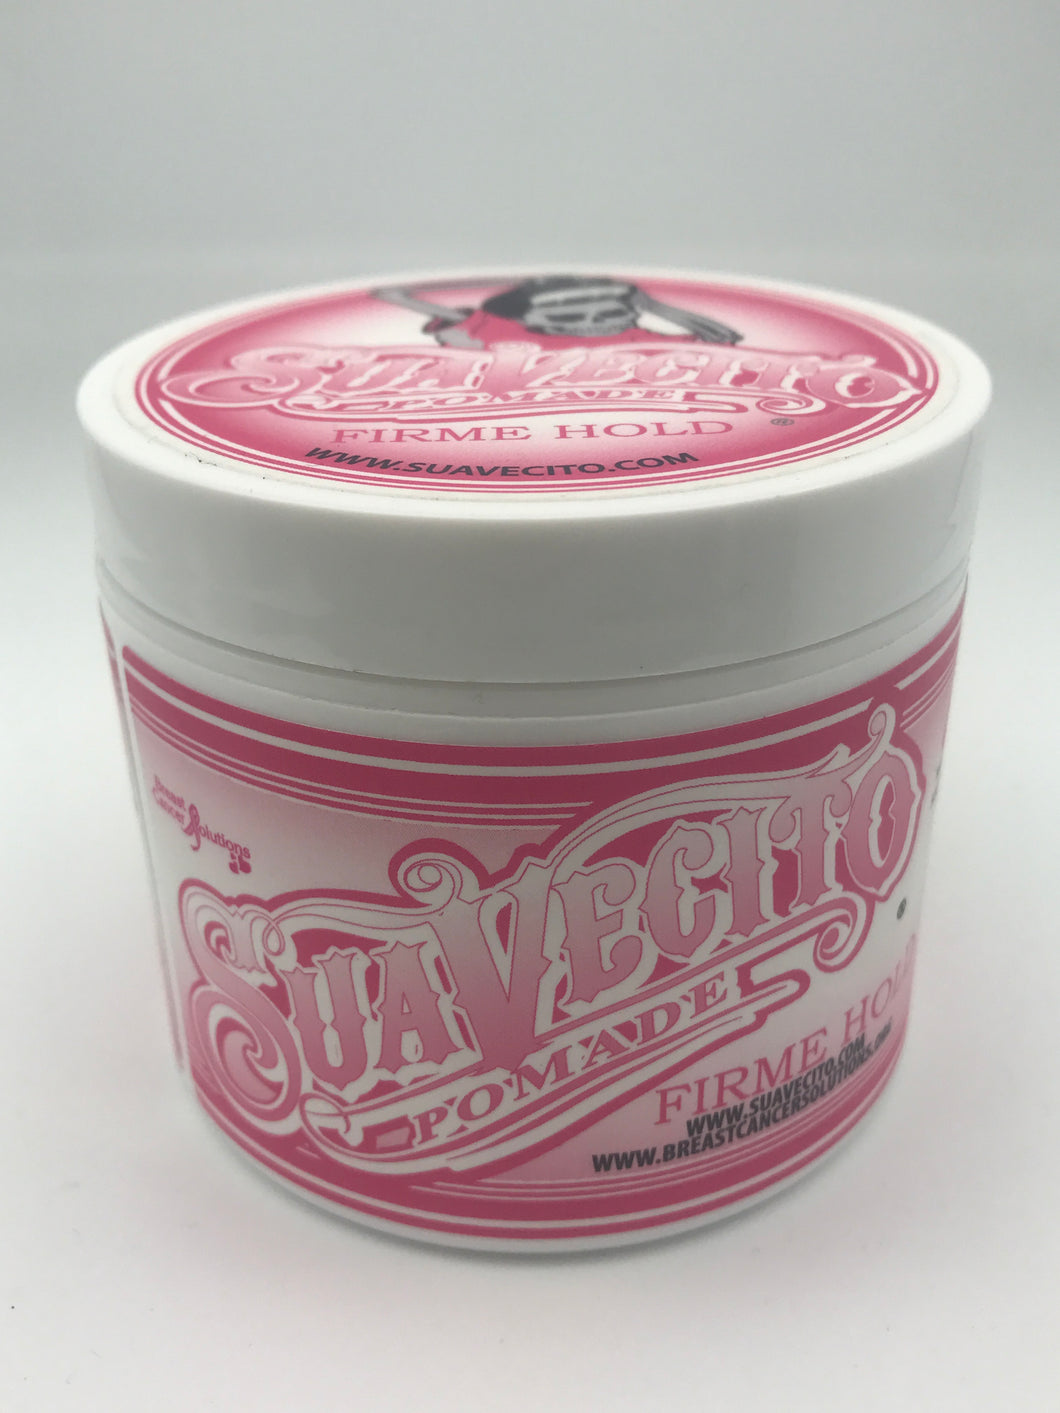 Suavecito Firme Hold Pomade (Breast Cancer Solution Collection)